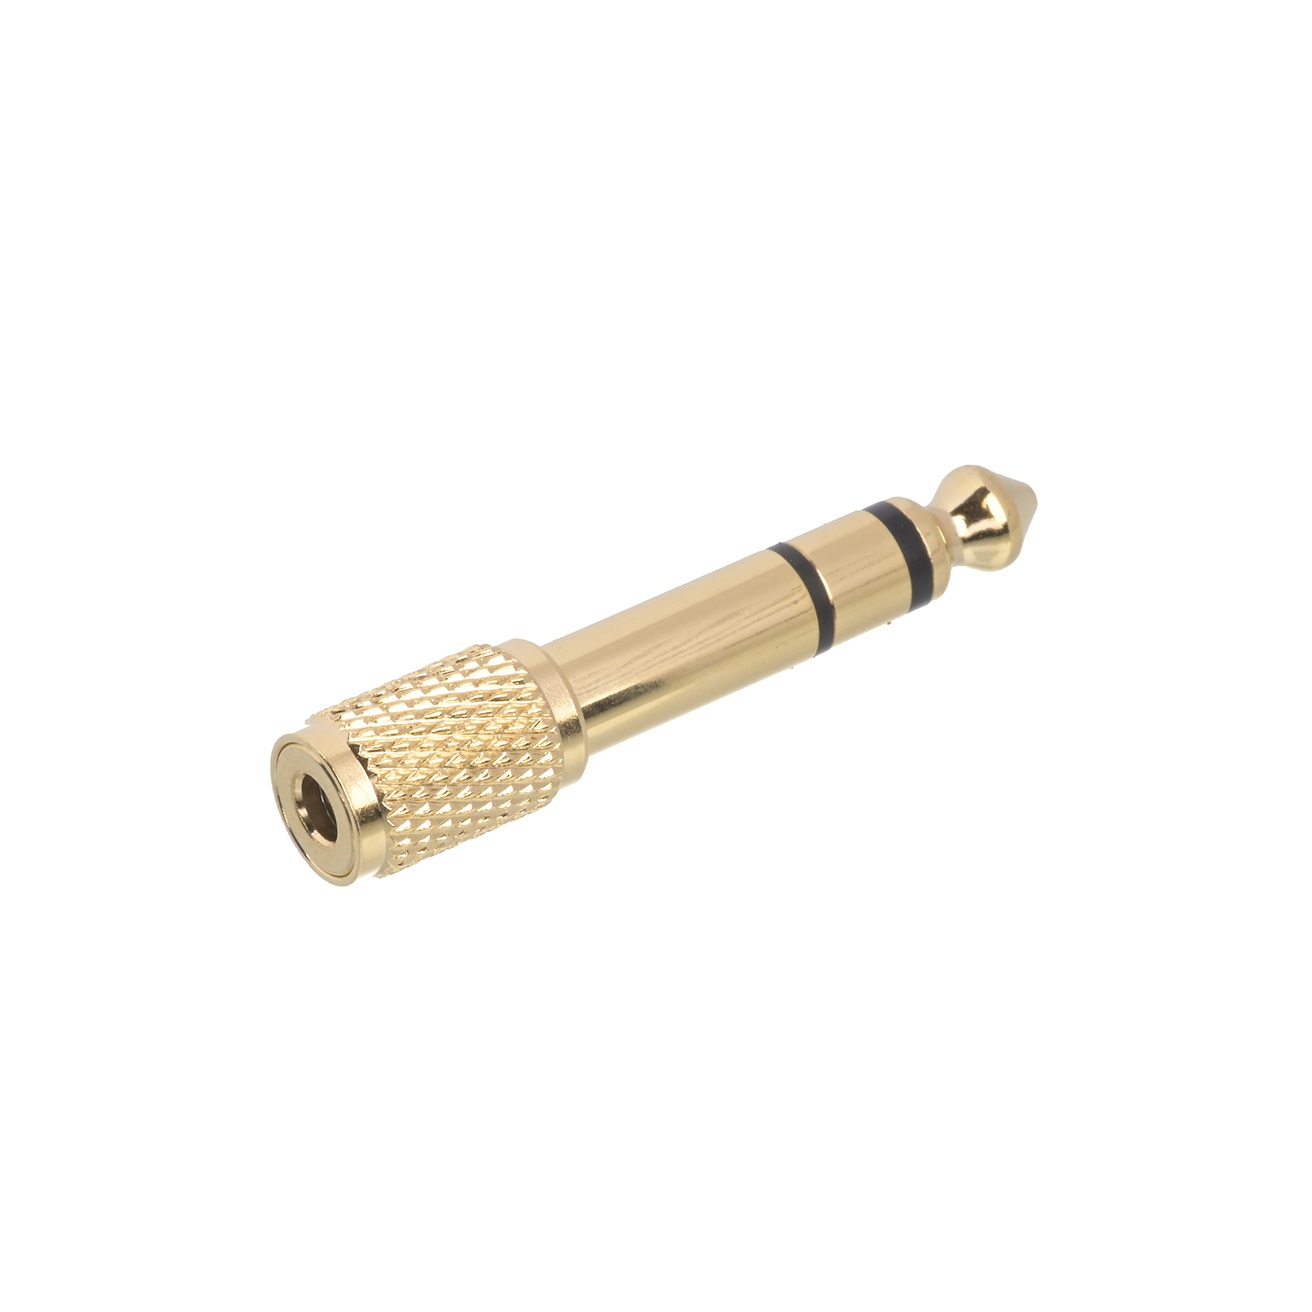 Adapter jack 6.3 gold-plated